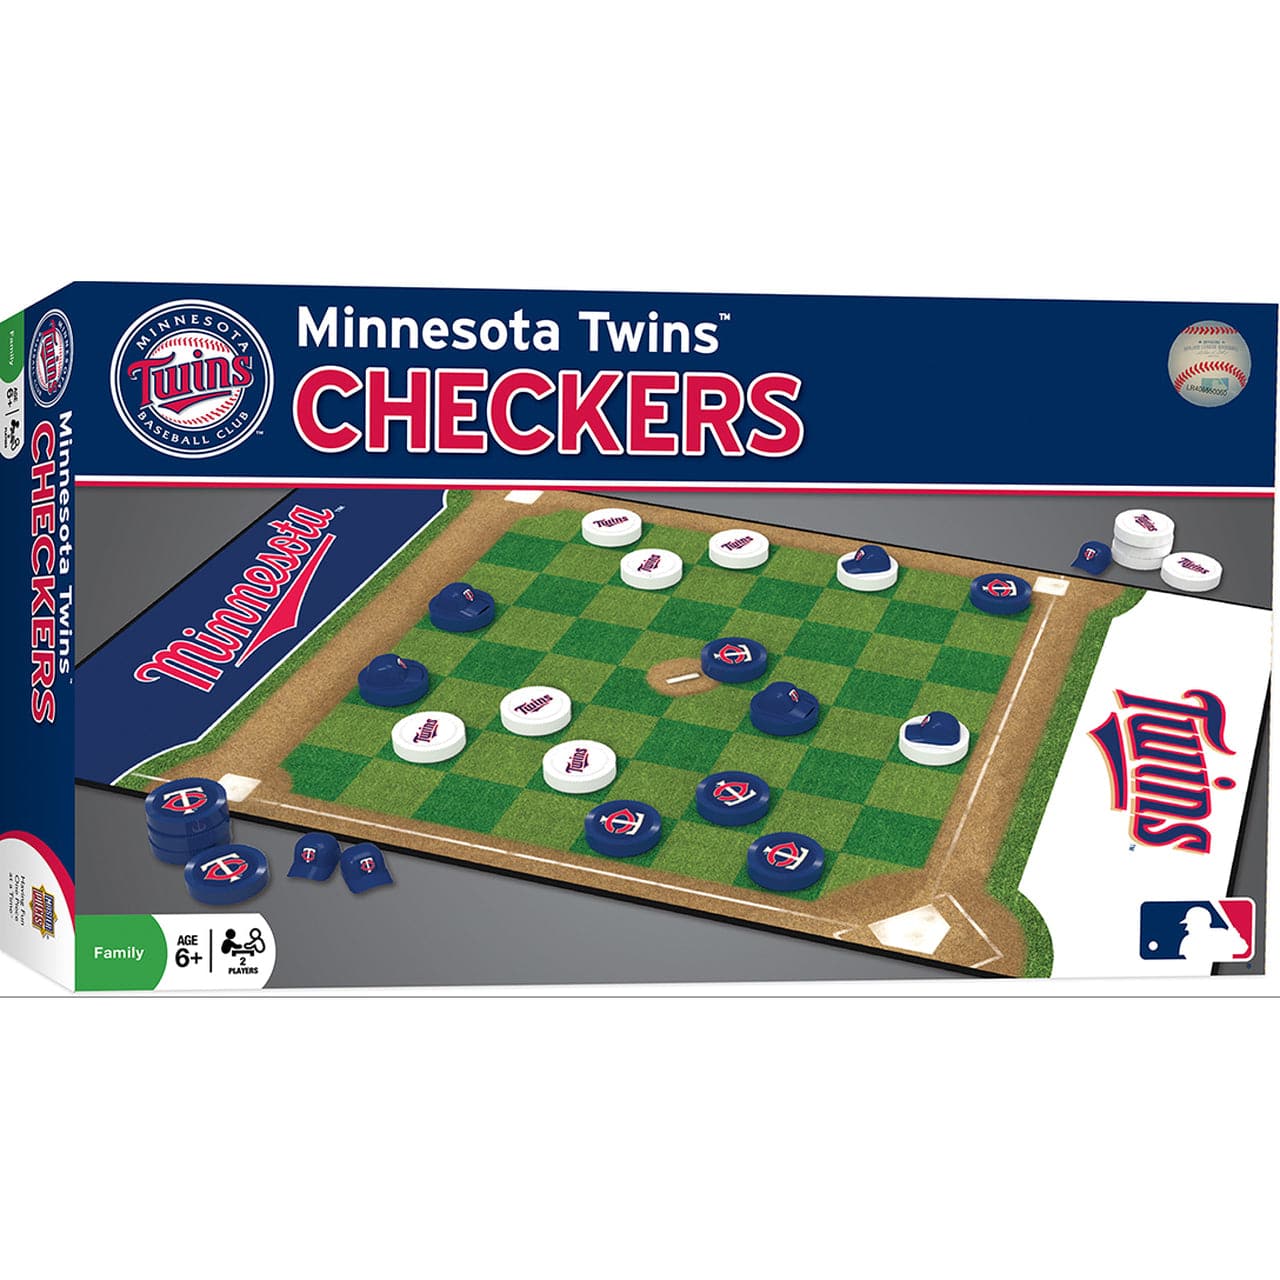 MasterPieces-Minnesota Twins Checkers Board Game-41554-Legacy Toys